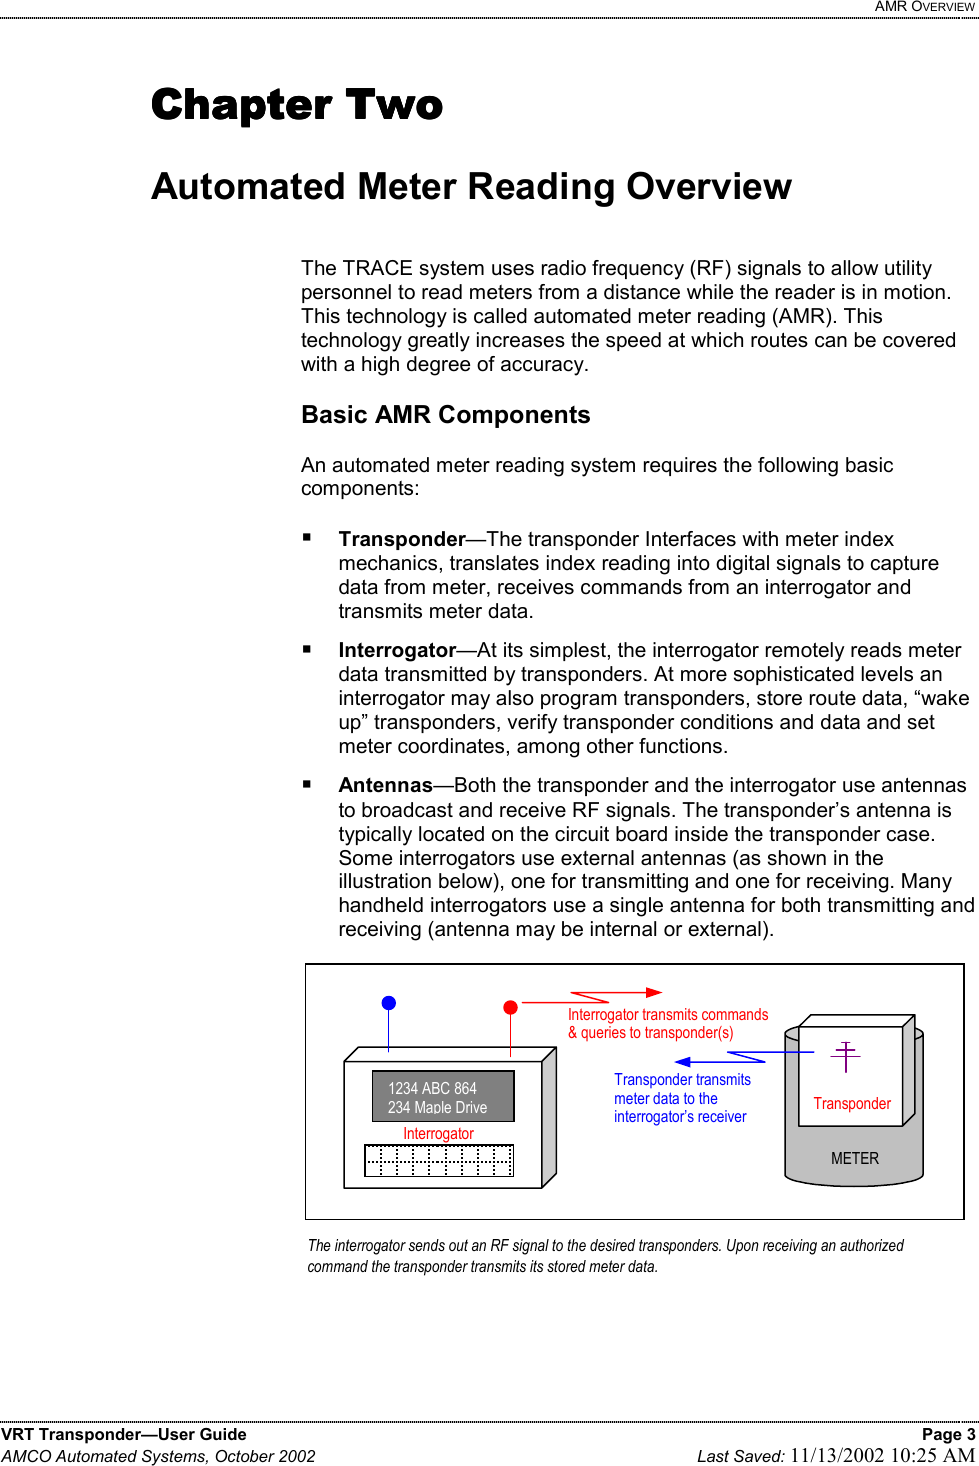   AMR OVERVIEW VRT Transponder—User Guide    Page 3 AMCO Automated Systems, October 2002    Last Saved: 11/13/2002 10:25 AM   Chapter TwoChapter TwoChapter TwoChapter Two     Automated Meter Reading Overview   The TRACE system uses radio frequency (RF) signals to allow utility personnel to read meters from a distance while the reader is in motion. This technology is called automated meter reading (AMR). This technology greatly increases the speed at which routes can be covered with a high degree of accuracy.  Basic AMR Components  An automated meter reading system requires the following basic components:   Transponder—The transponder Interfaces with meter index mechanics, translates index reading into digital signals to capture data from meter, receives commands from an interrogator and transmits meter data.  Interrogator—At its simplest, the interrogator remotely reads meter data transmitted by transponders. At more sophisticated levels an interrogator may also program transponders, store route data, “wake up” transponders, verify transponder conditions and data and set meter coordinates, among other functions.  Antennas—Both the transponder and the interrogator use antennas to broadcast and receive RF signals. The transponder’s antenna is typically located on the circuit board inside the transponder case. Some interrogators use external antennas (as shown in the illustration below), one for transmitting and one for receiving. Many handheld interrogators use a single antenna for both transmitting and receiving (antenna may be internal or external).                Transponder METER The interrogator sends out an RF signal to the desired transponders. Upon receiving an authorized command the transponder transmits its stored meter data.  1234 ABC 864 234 Maple DriveInterrogator Interrogator transmits commands &amp; queries to transponder(s)  Transponder transmits  meter data to the interrogator’s receiver   